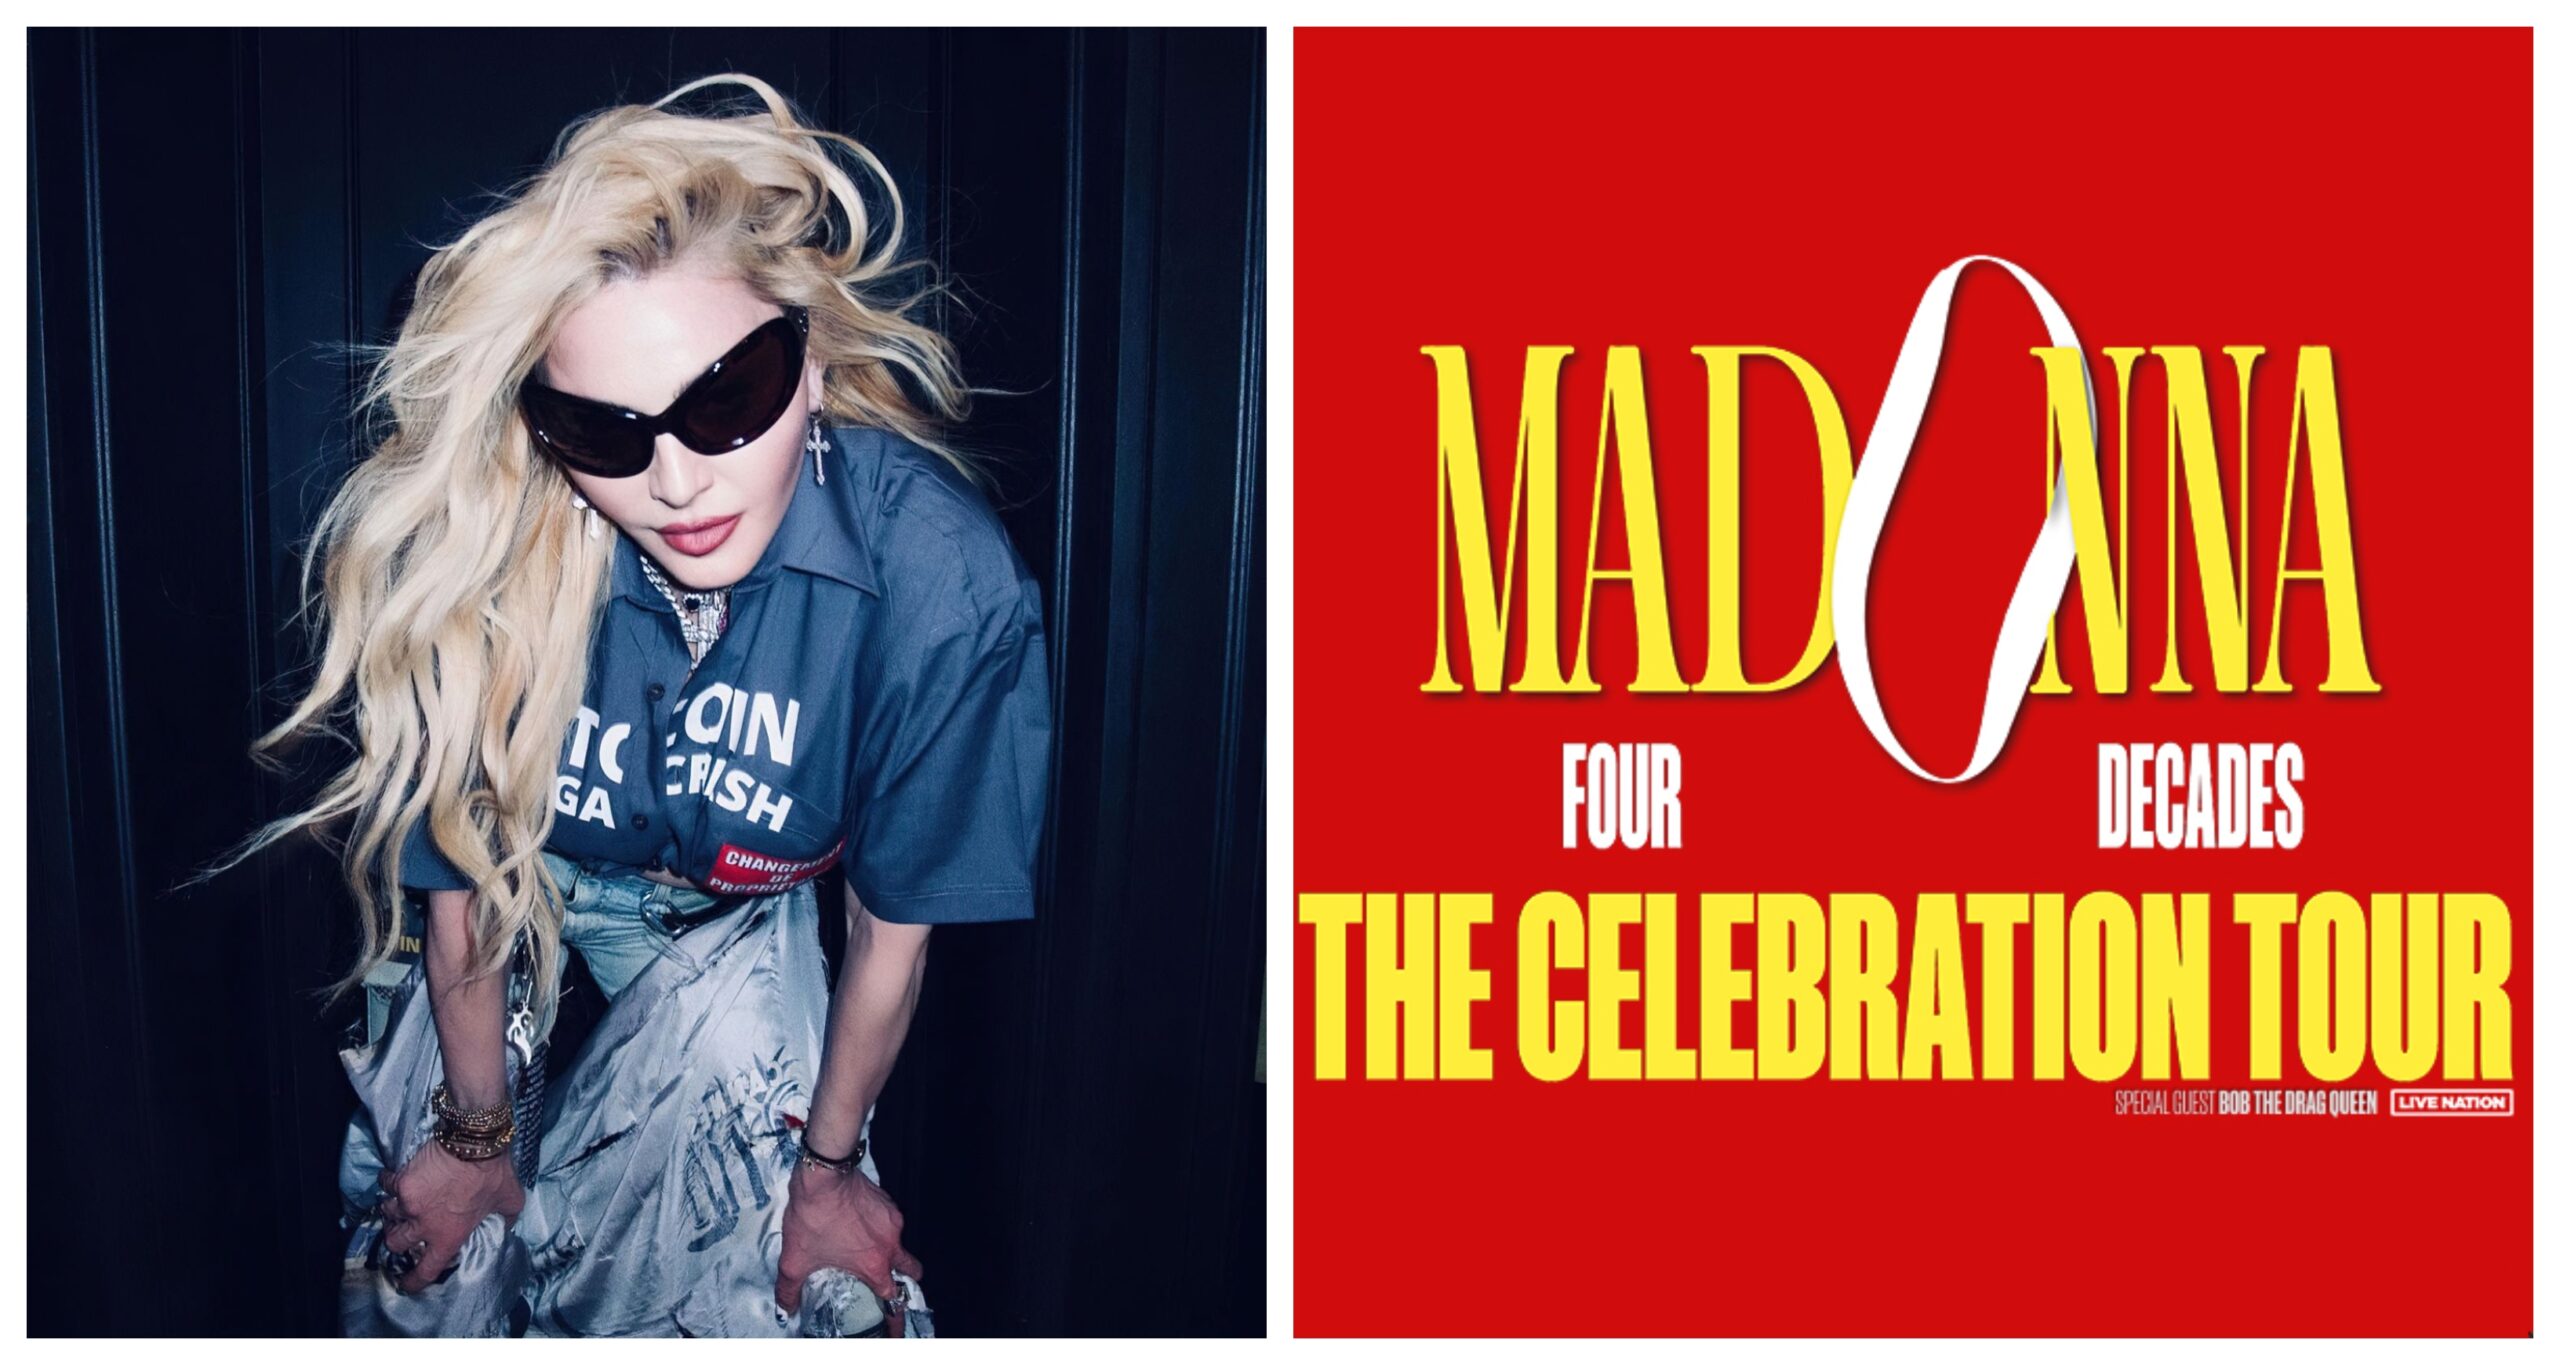 Diva in Demand! Madonna Adds EVEN MORE Shows To Eagerly Anticipated